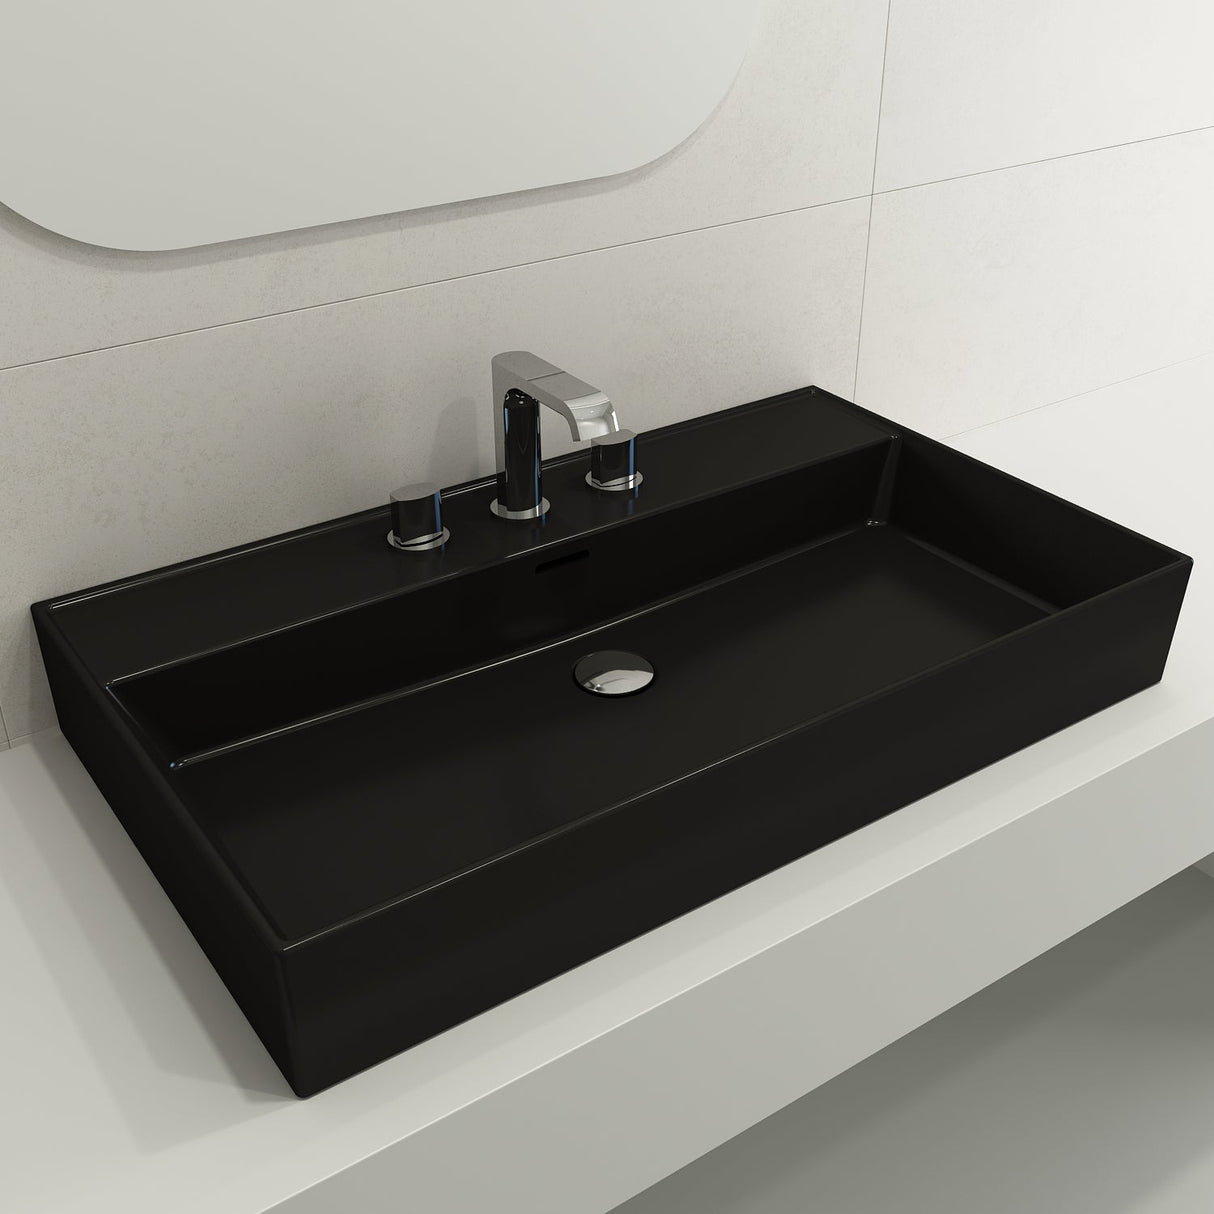 BOCCHI 1377-004-0127 Milano Wall-Mounted Sink Fireclay 32 in. 3-Hole with Overflow in Matte Black